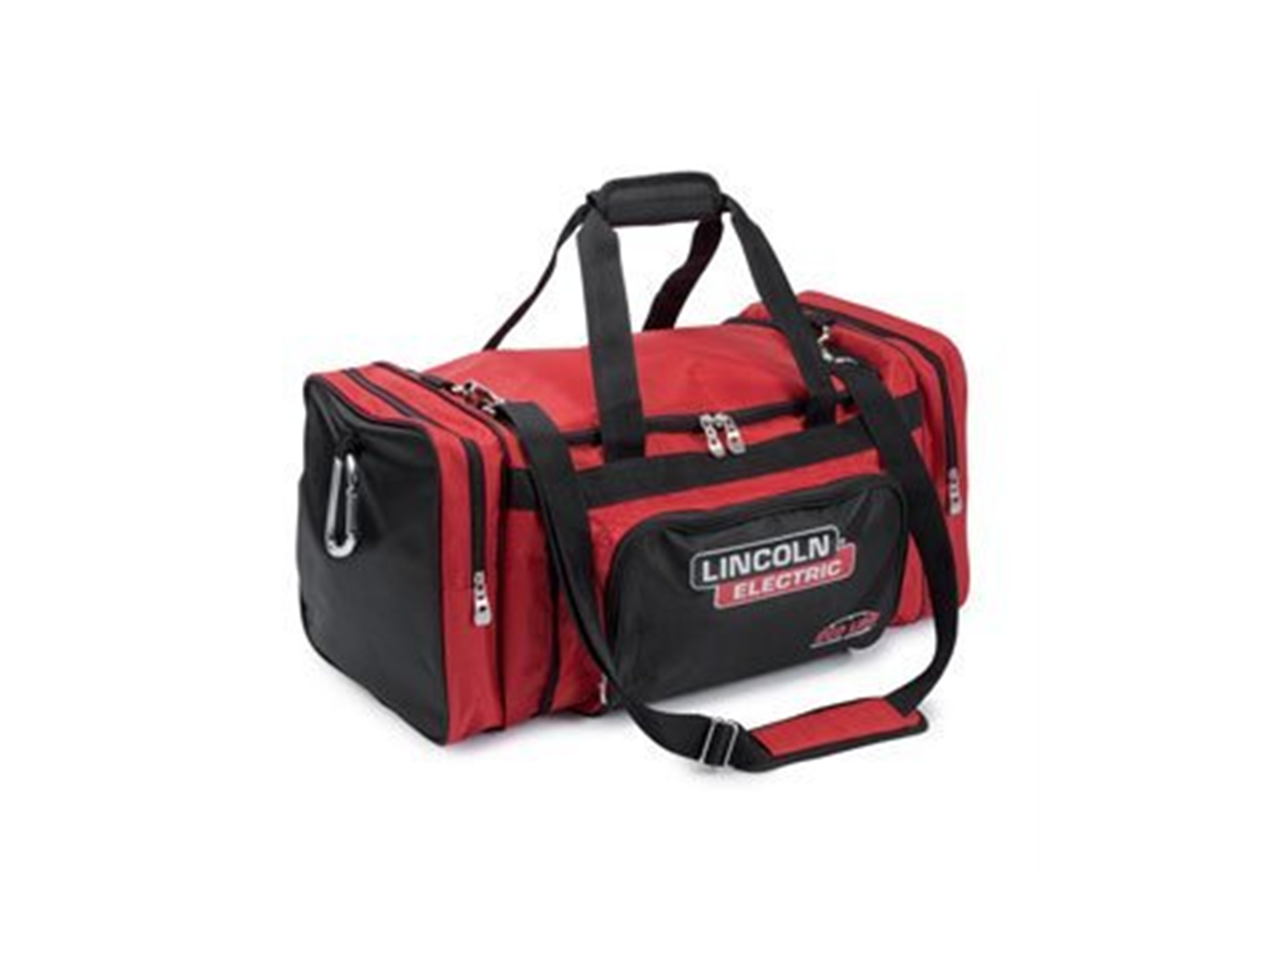 Lincoln Electric K3096-1 Welding Equipment Bag One Size Black/Red